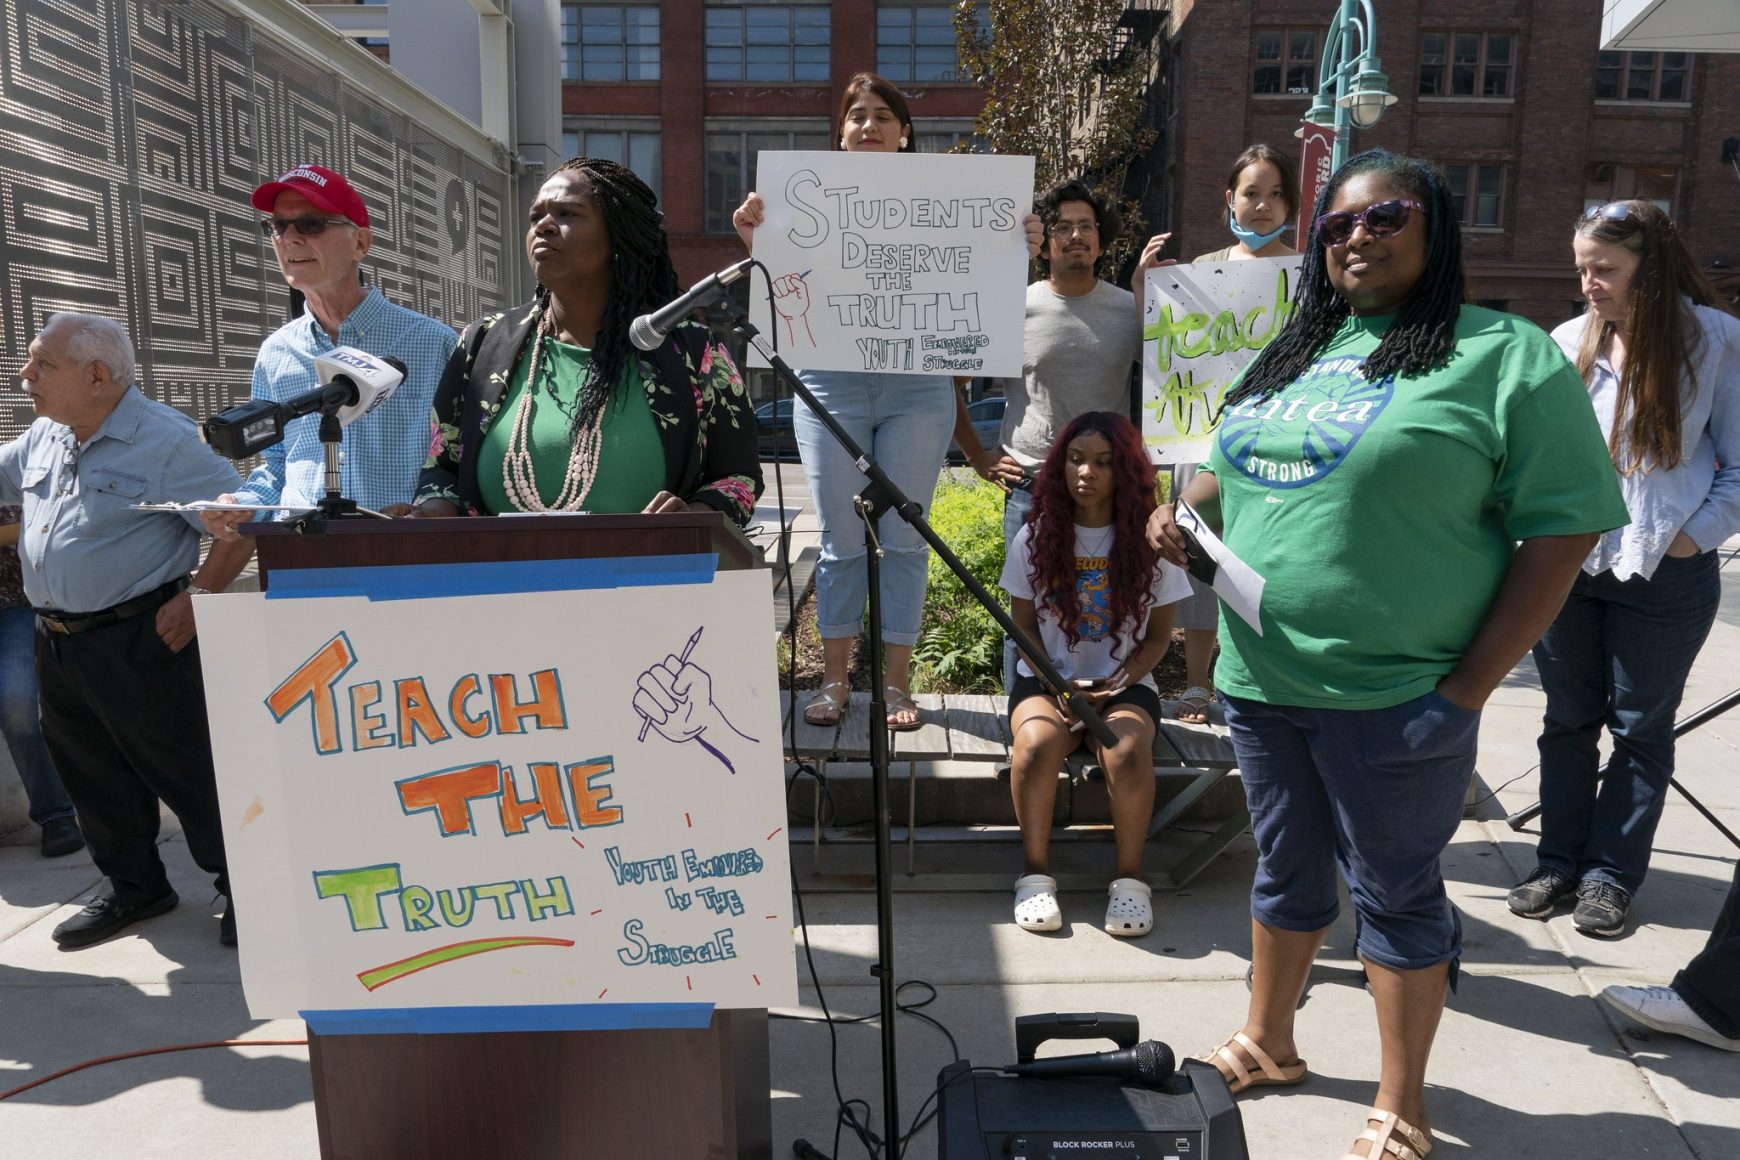 Organized students and teachers at the “Teach the Truth” Rally, some holding signs and one behind a podium